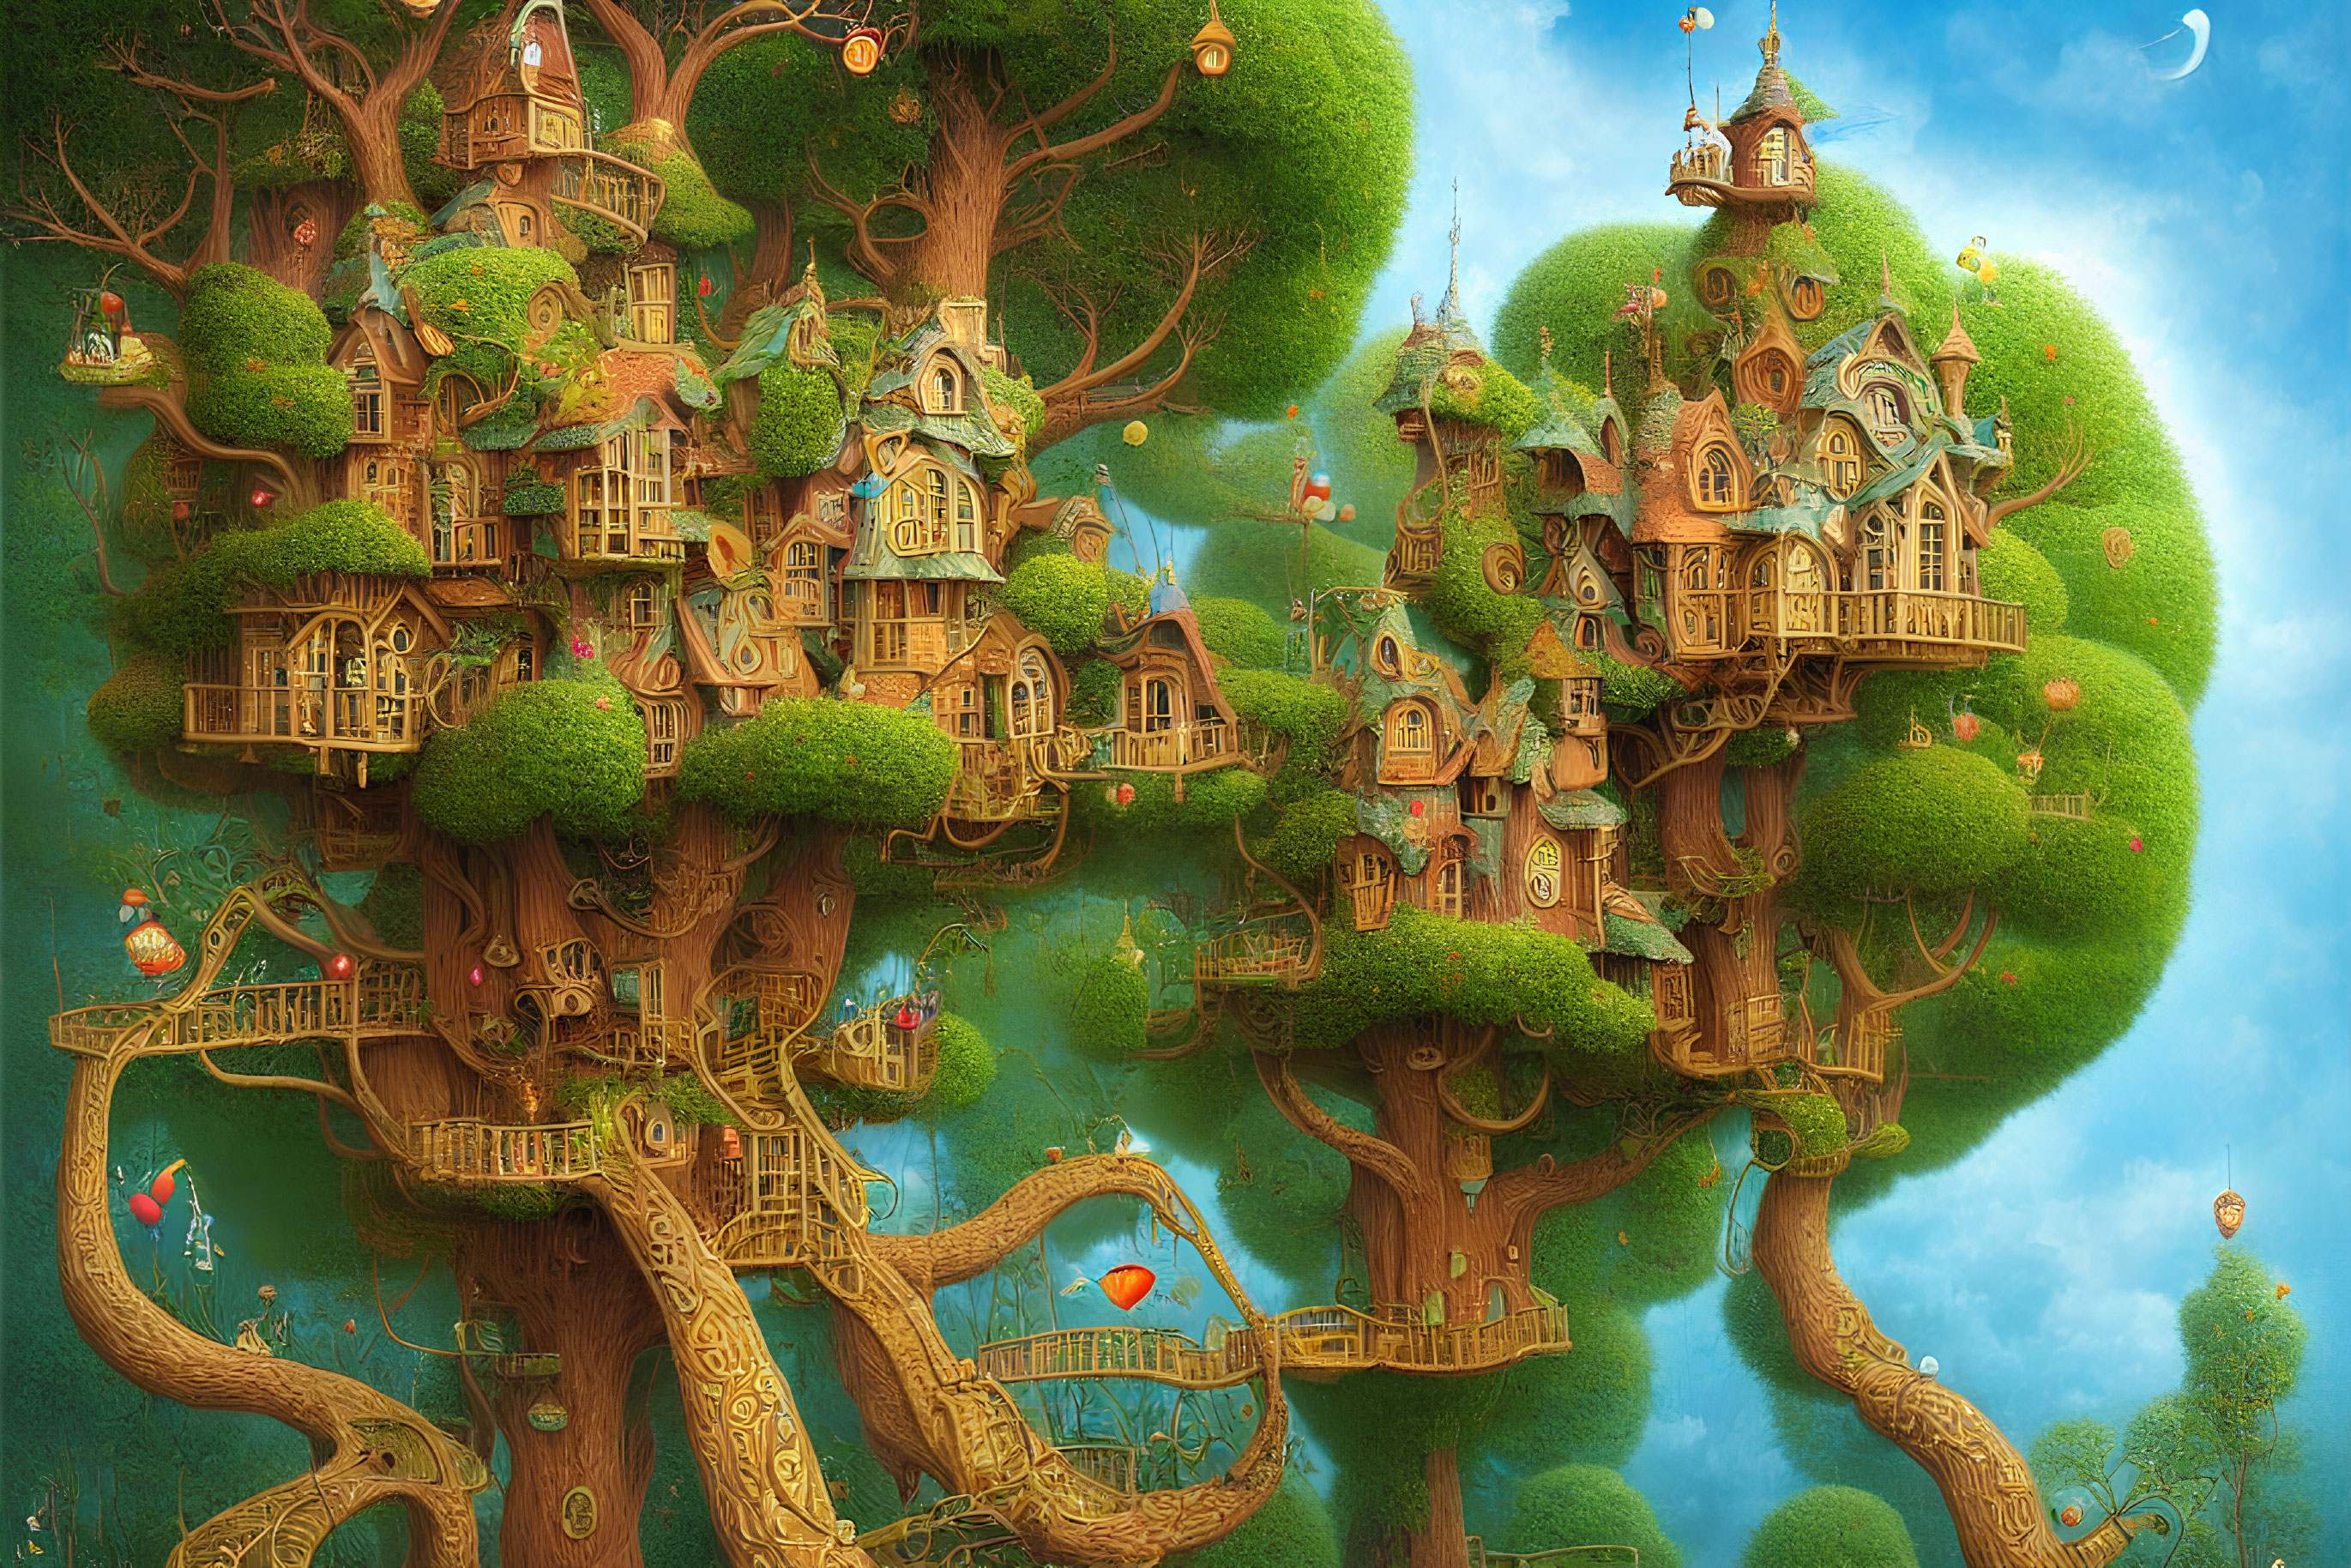 Whimsical treehouse illustration with wooden homes, bridges, and hot air balloon